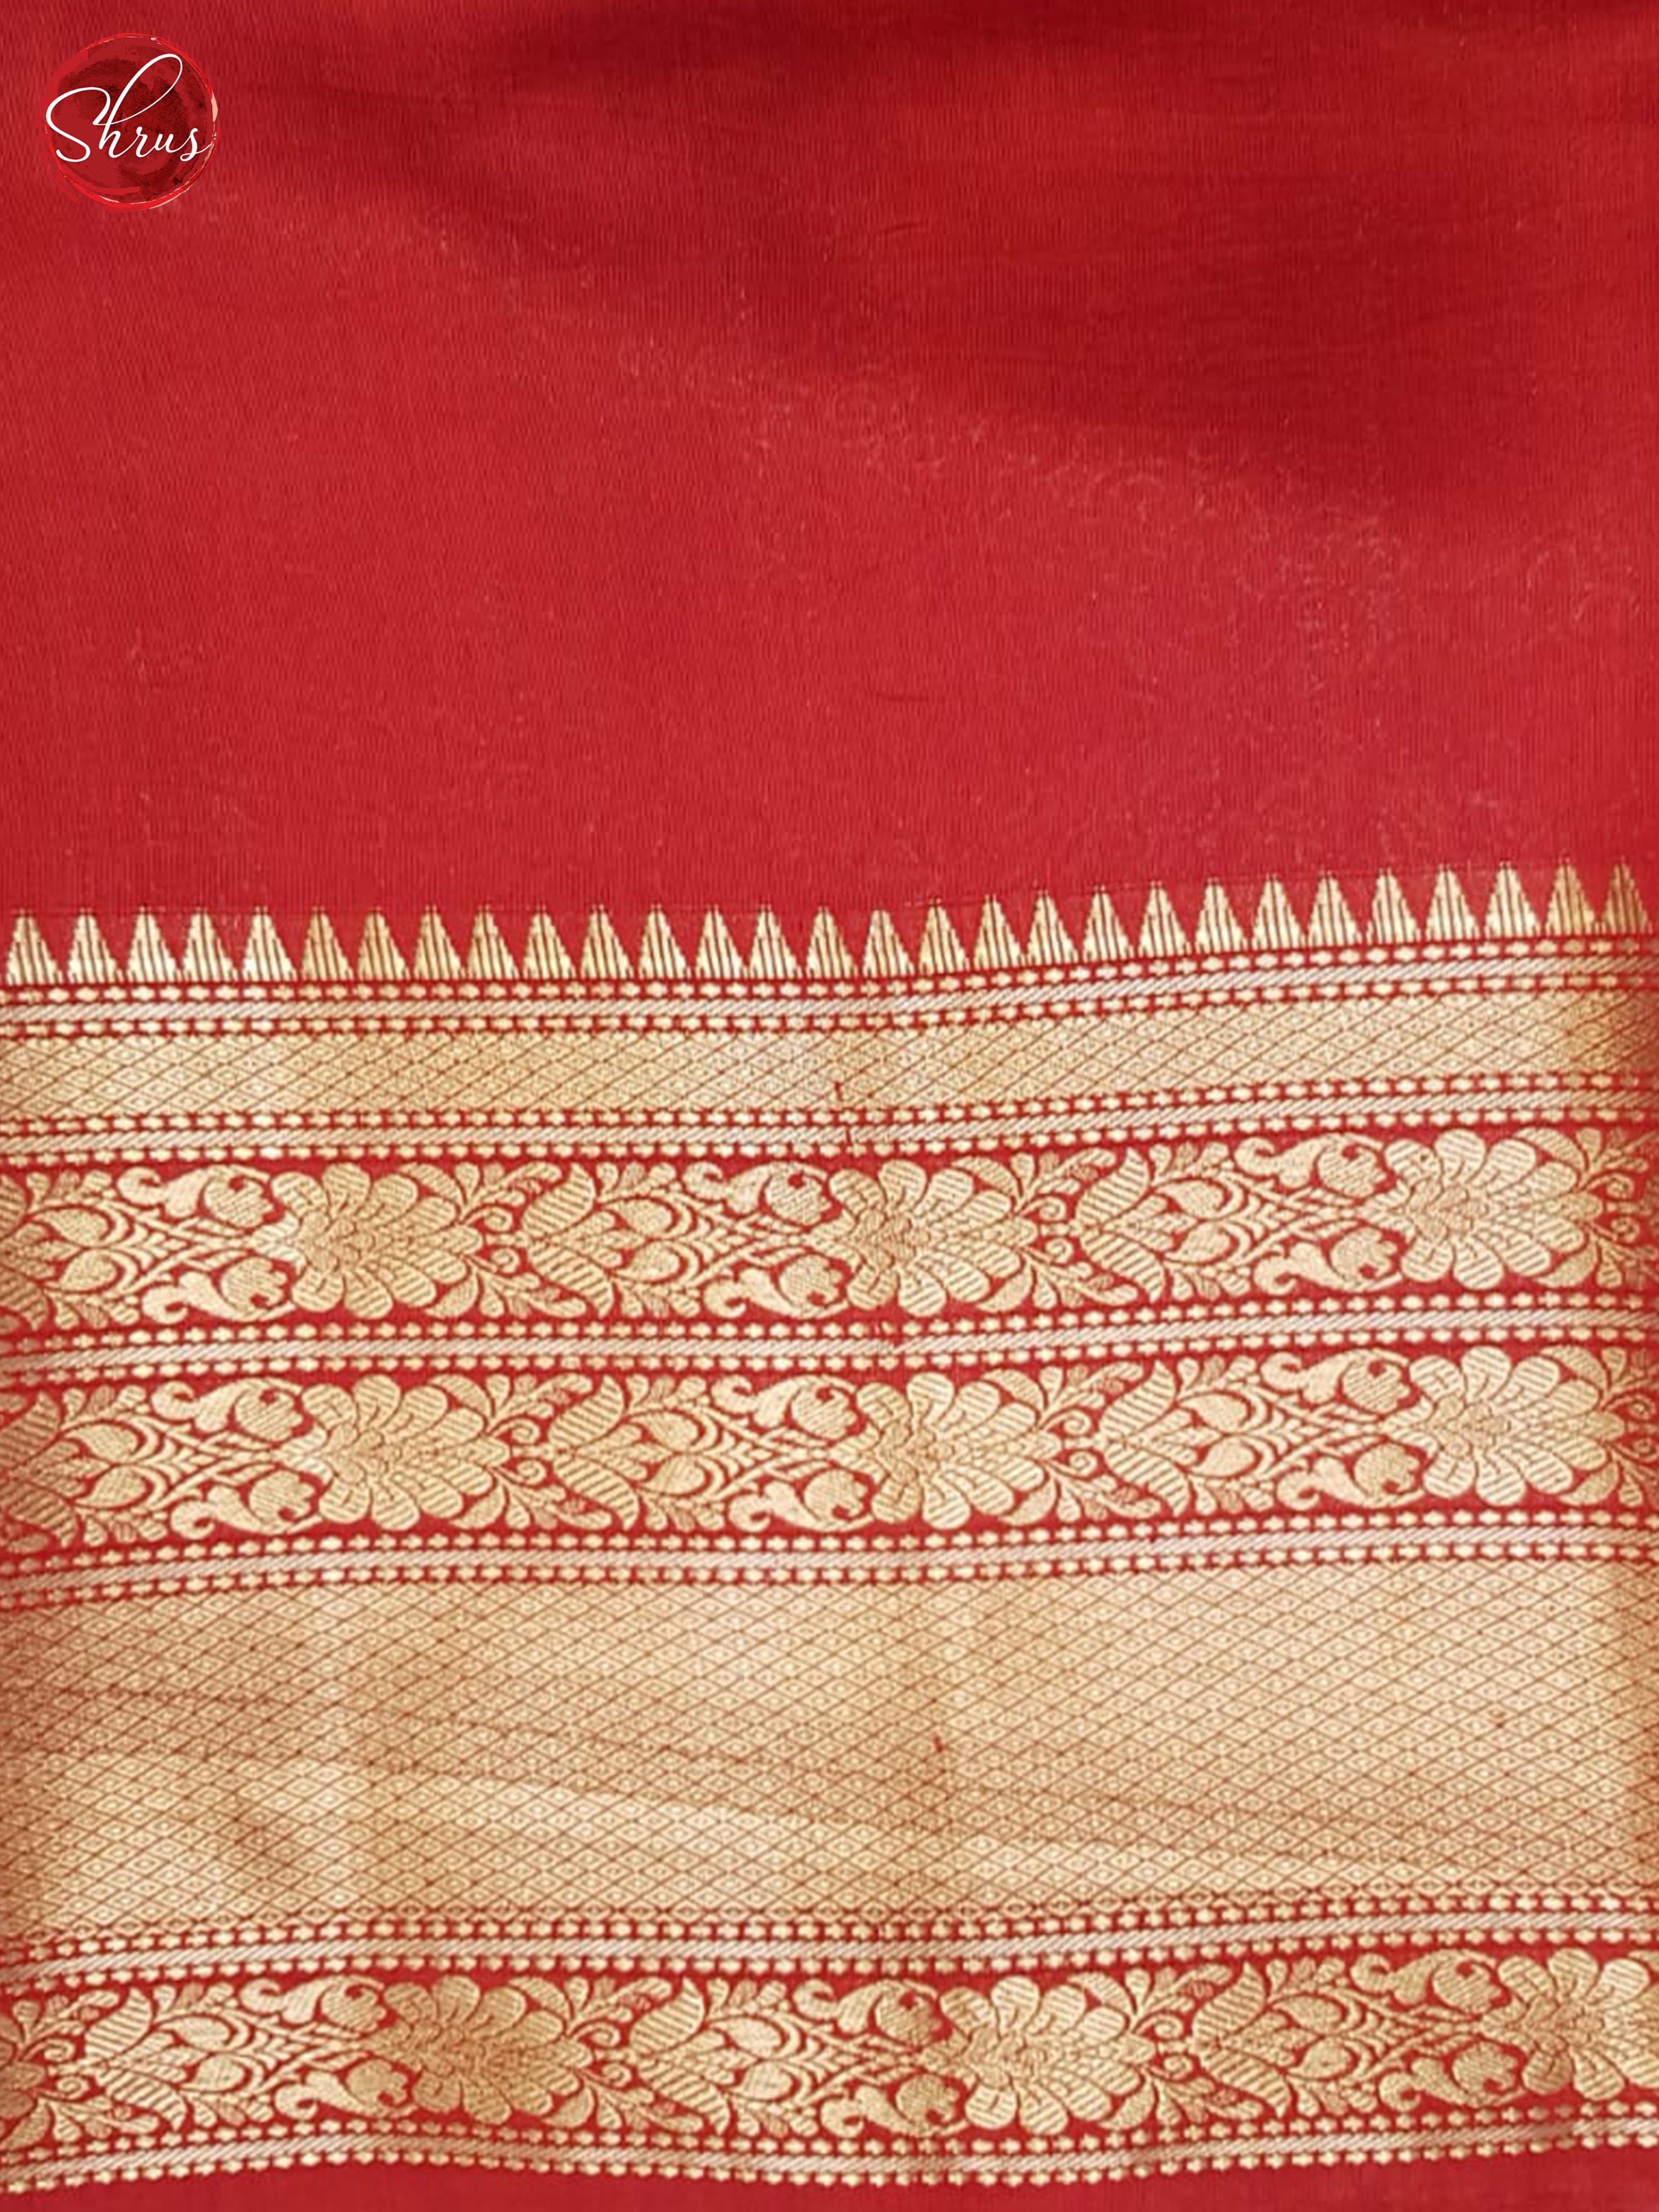 Green And Red- Tussar Saree - Shop on ShrusEternity.com